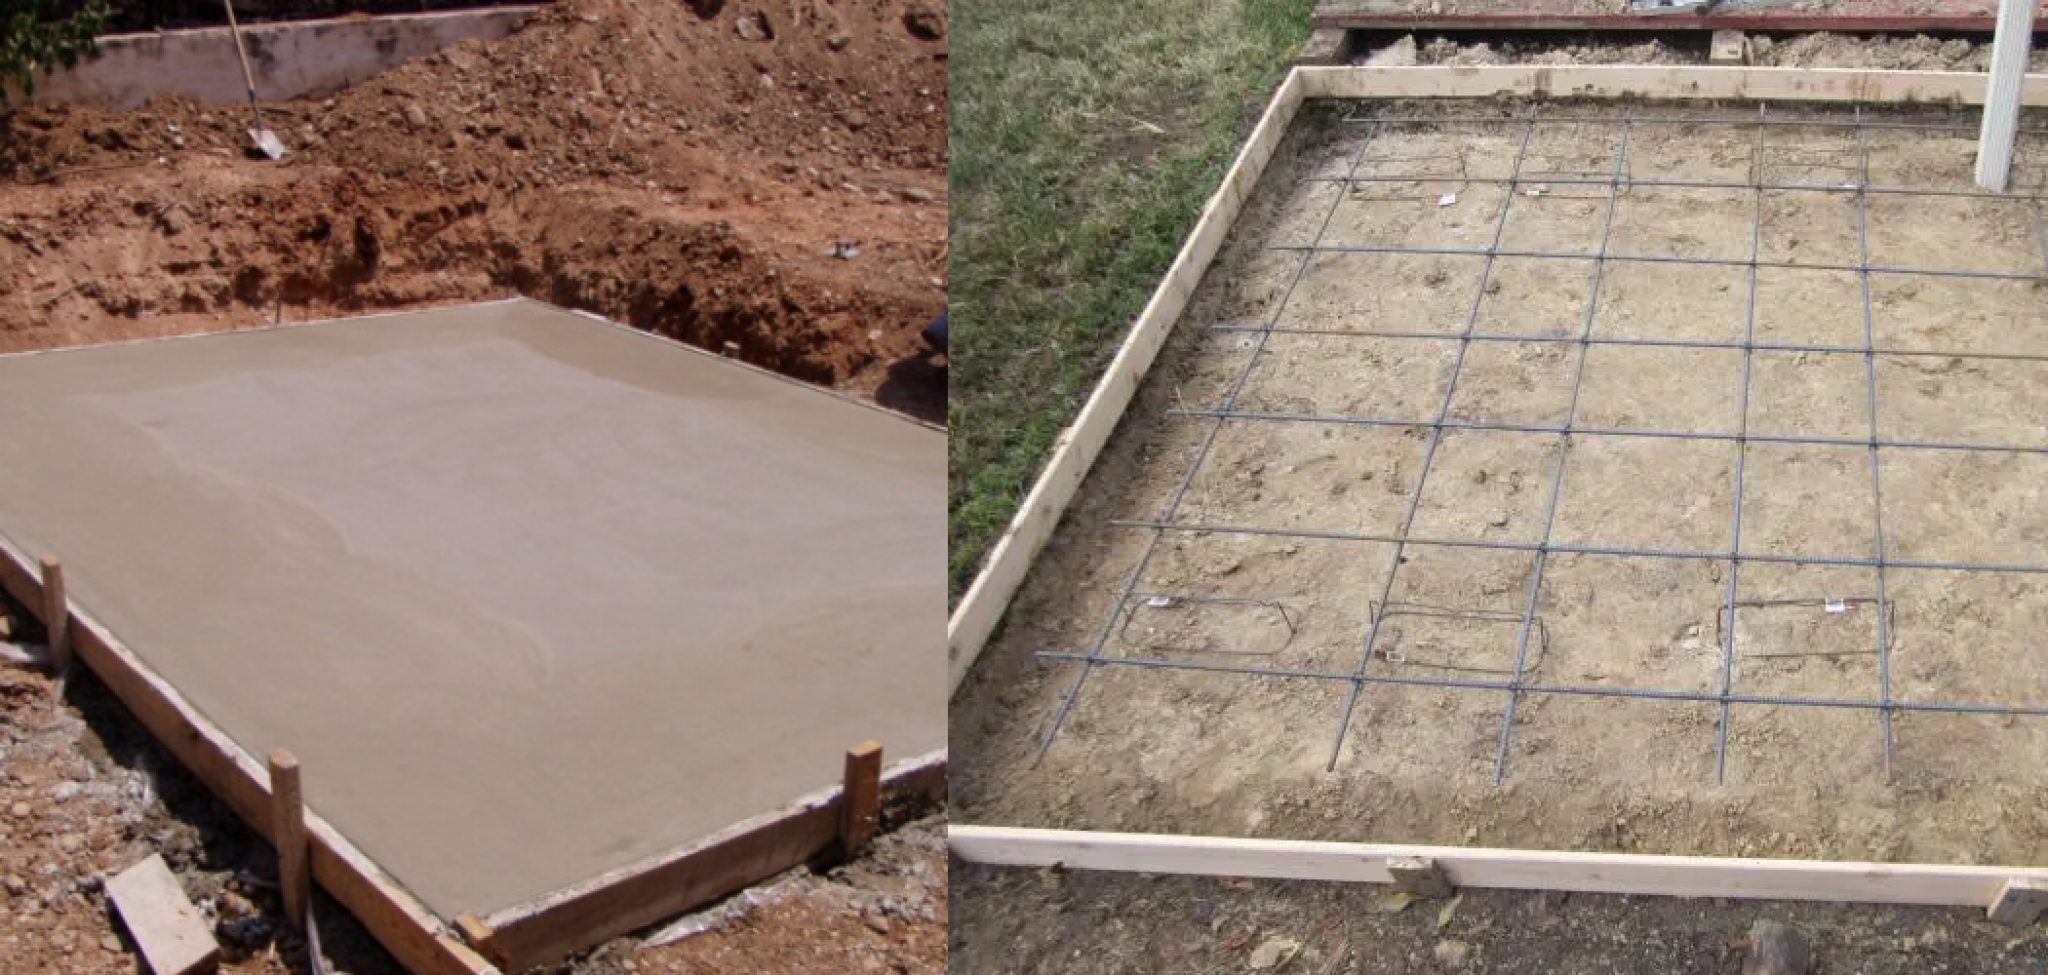 How To Pour A Concrete Slab For A Hot Tub 10 Effective Steps